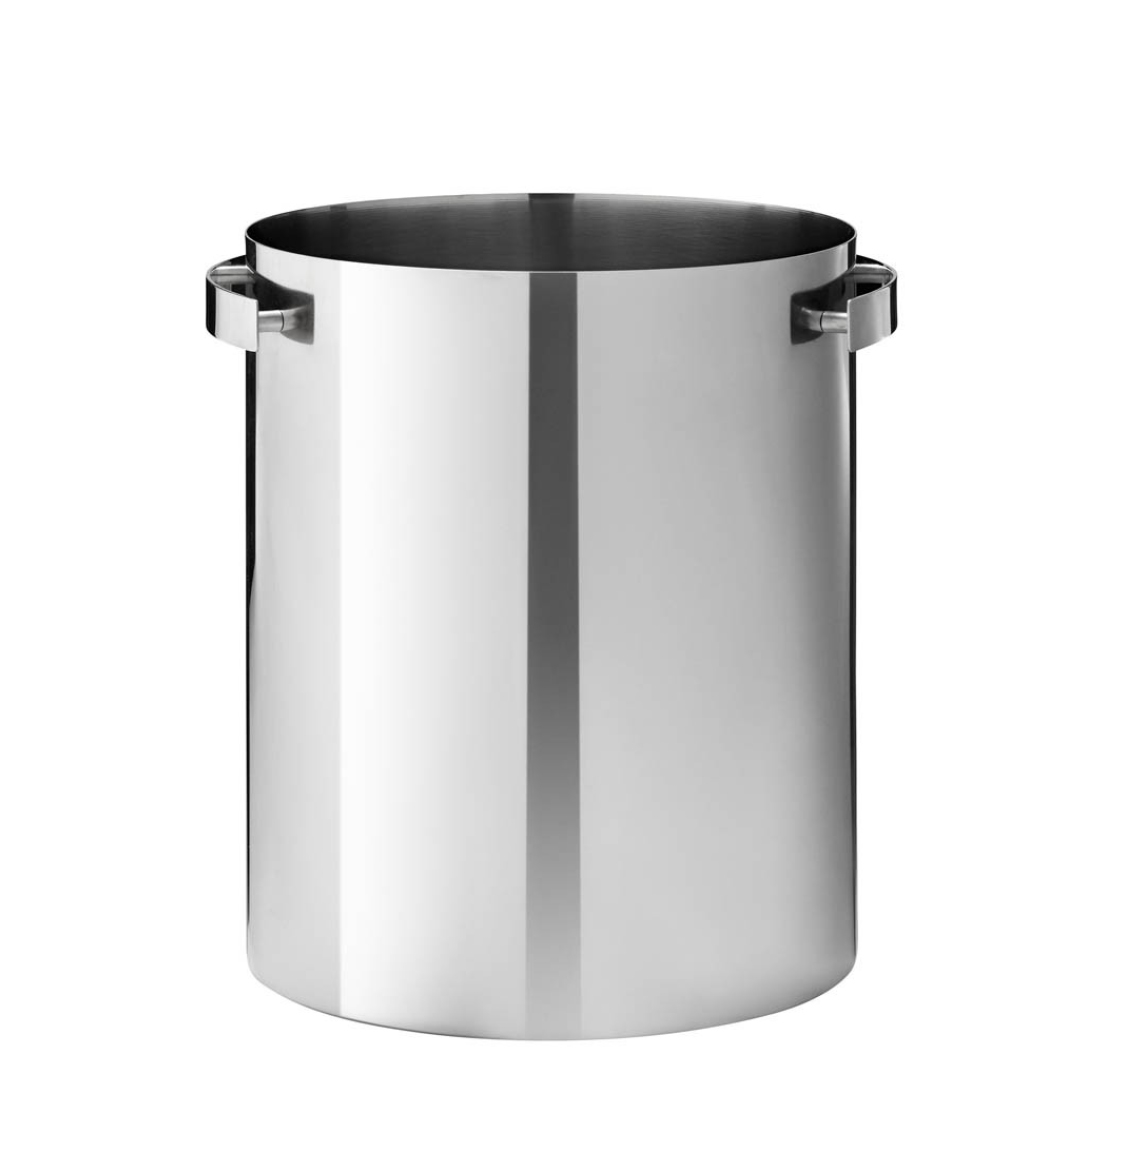 Stelton Stainless Steel Champagne Cooler